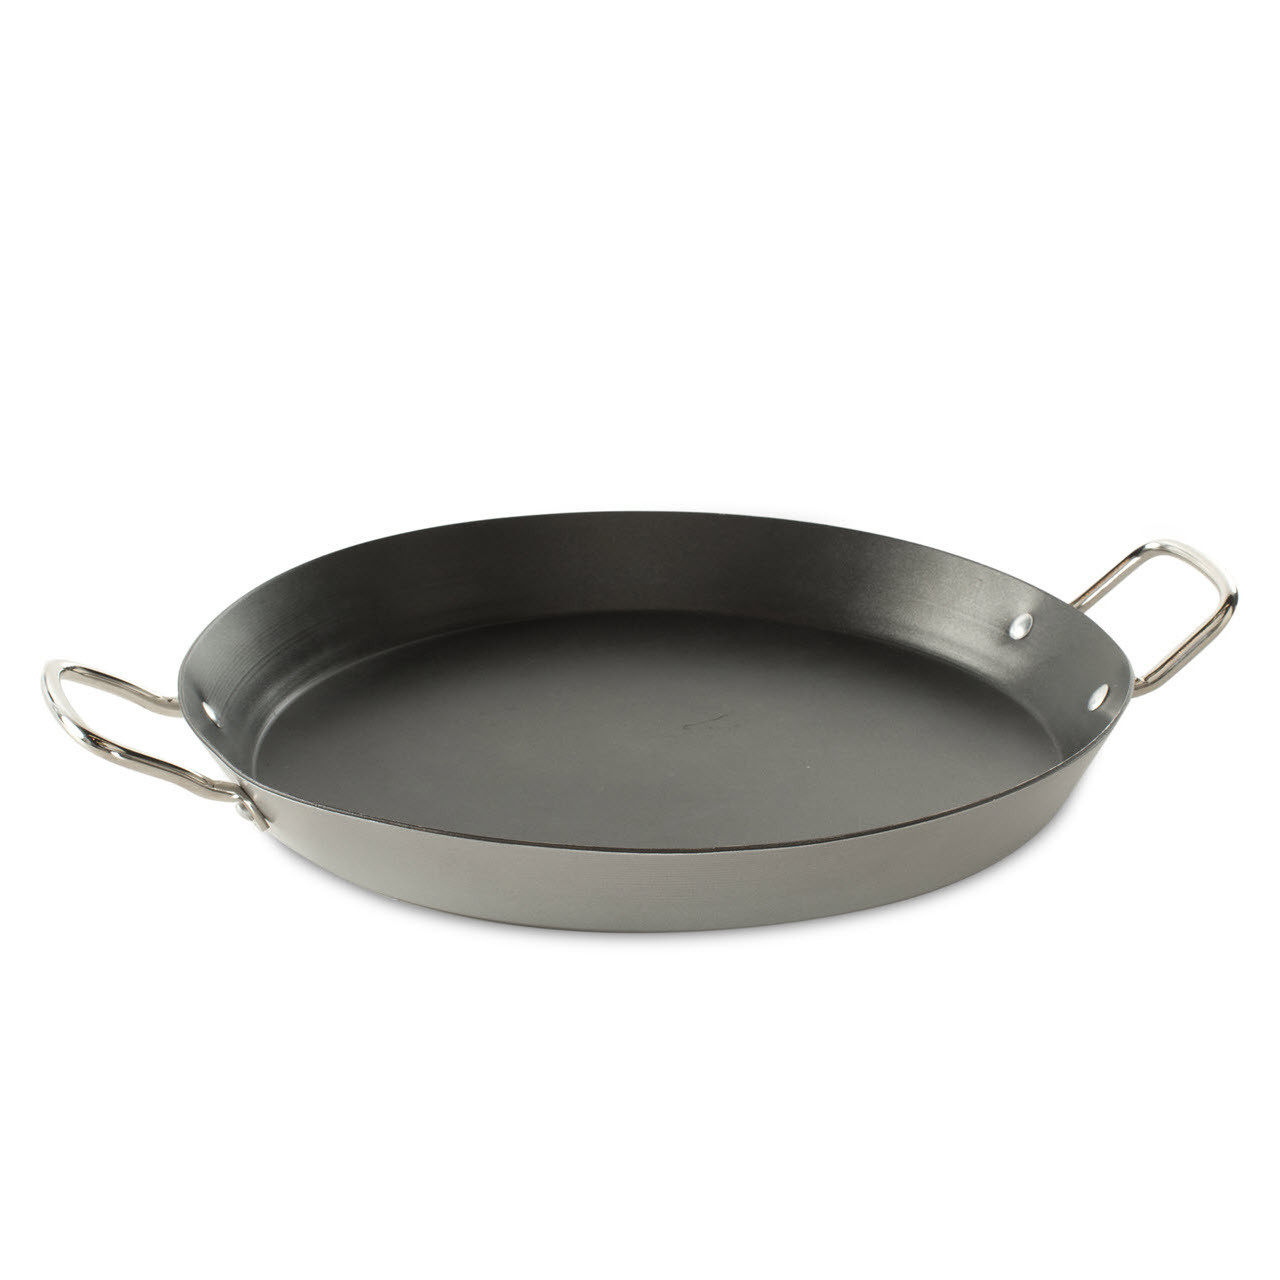 Belseher 15-Inch Paella Pan, Paella Cooker